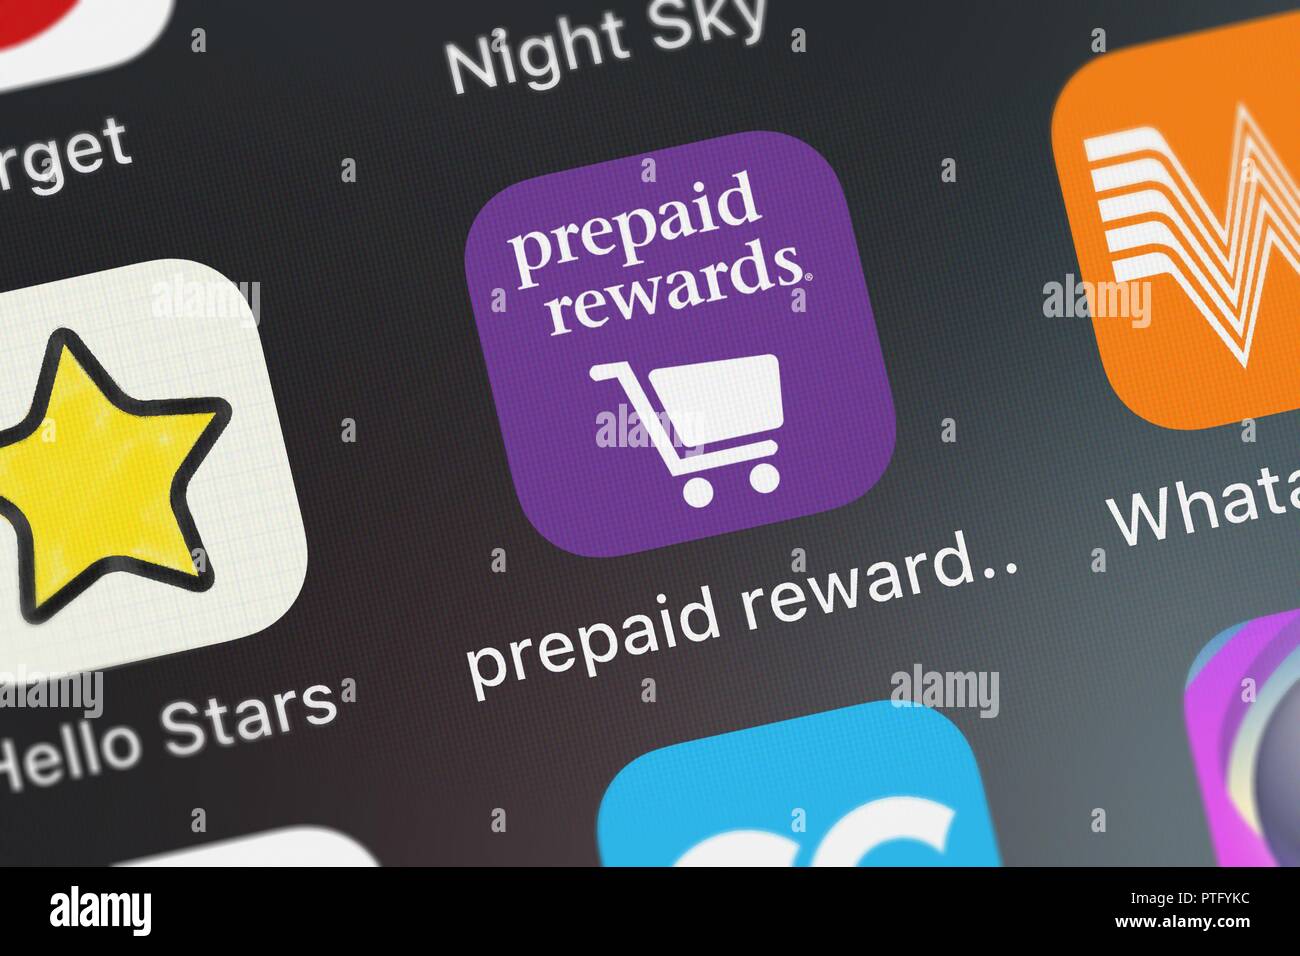 London, United Kingdom - October 09, 2018: Screenshot of the prepaid rewards mobile app from U.S. Bancorp icon on an iPhone. Stock Photo